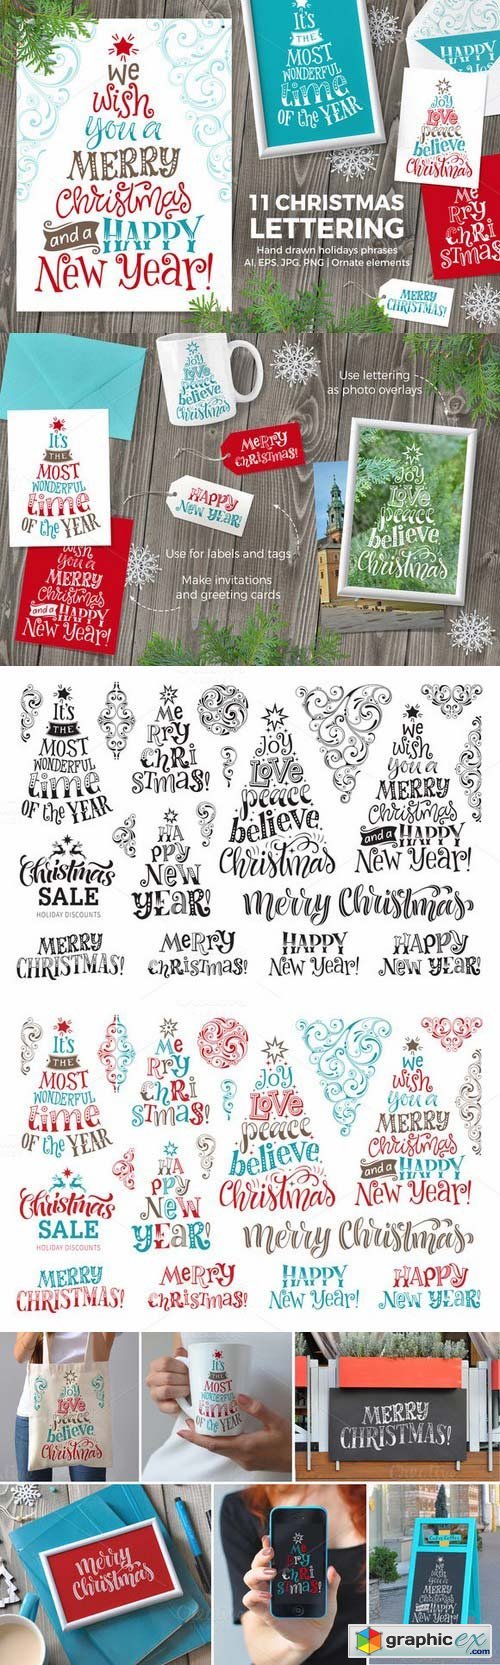 11 Christmas Lettering | 9 Ornaments